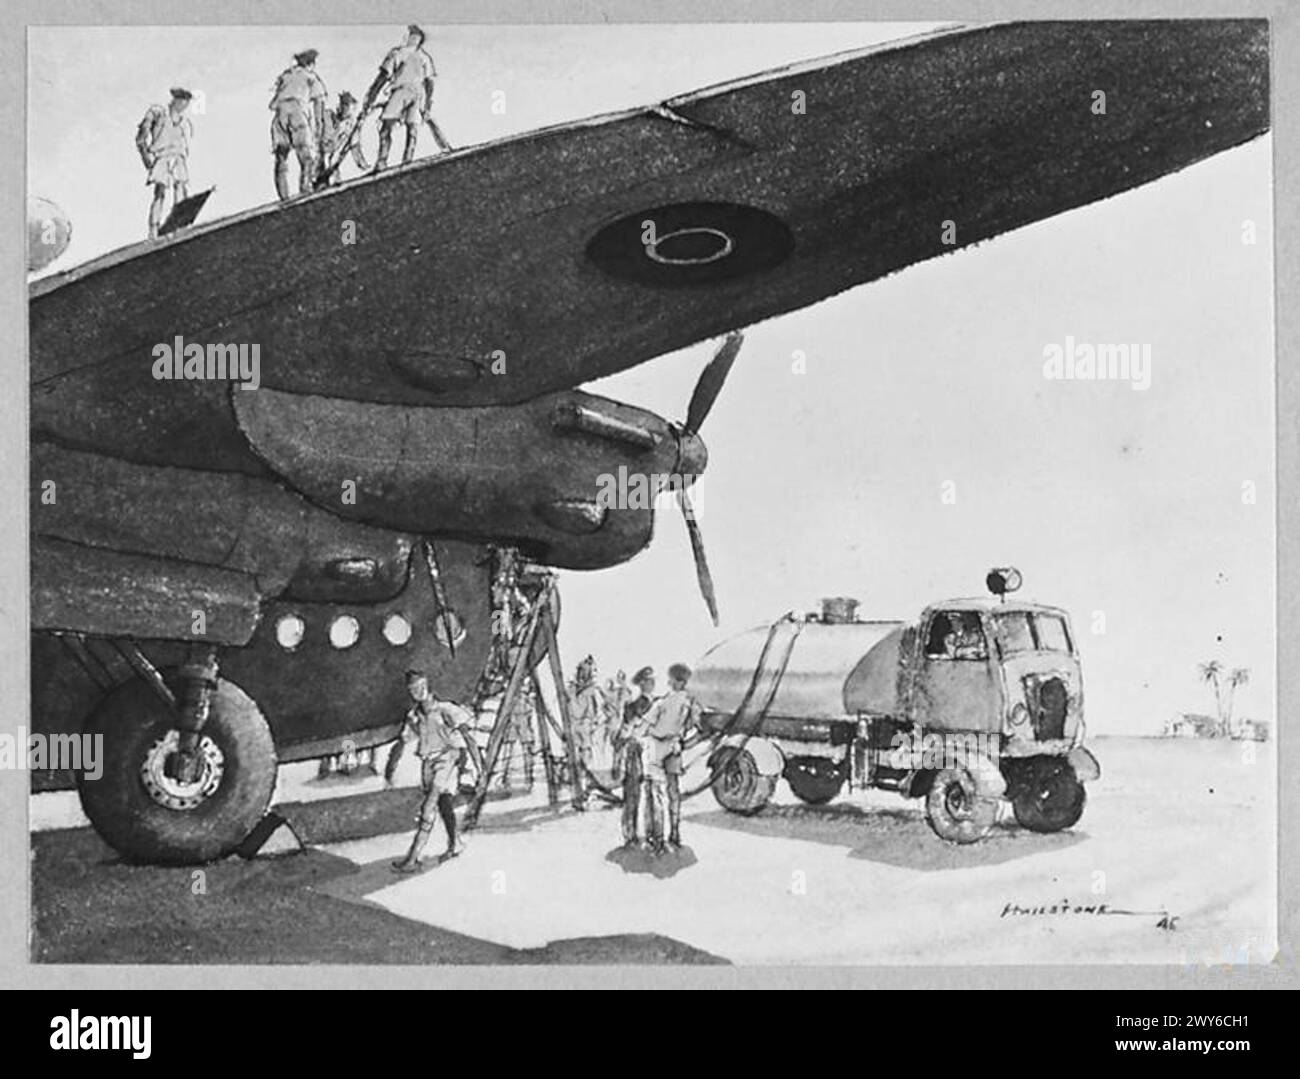 FAR EAST 'REFORS' ROUTE - For story see CH.15042 Picture issued 1945 shows - Servicing a York aircraft at Shaibah, Kuwait, Persian Gulf. , Royal Air Force Stock Photo